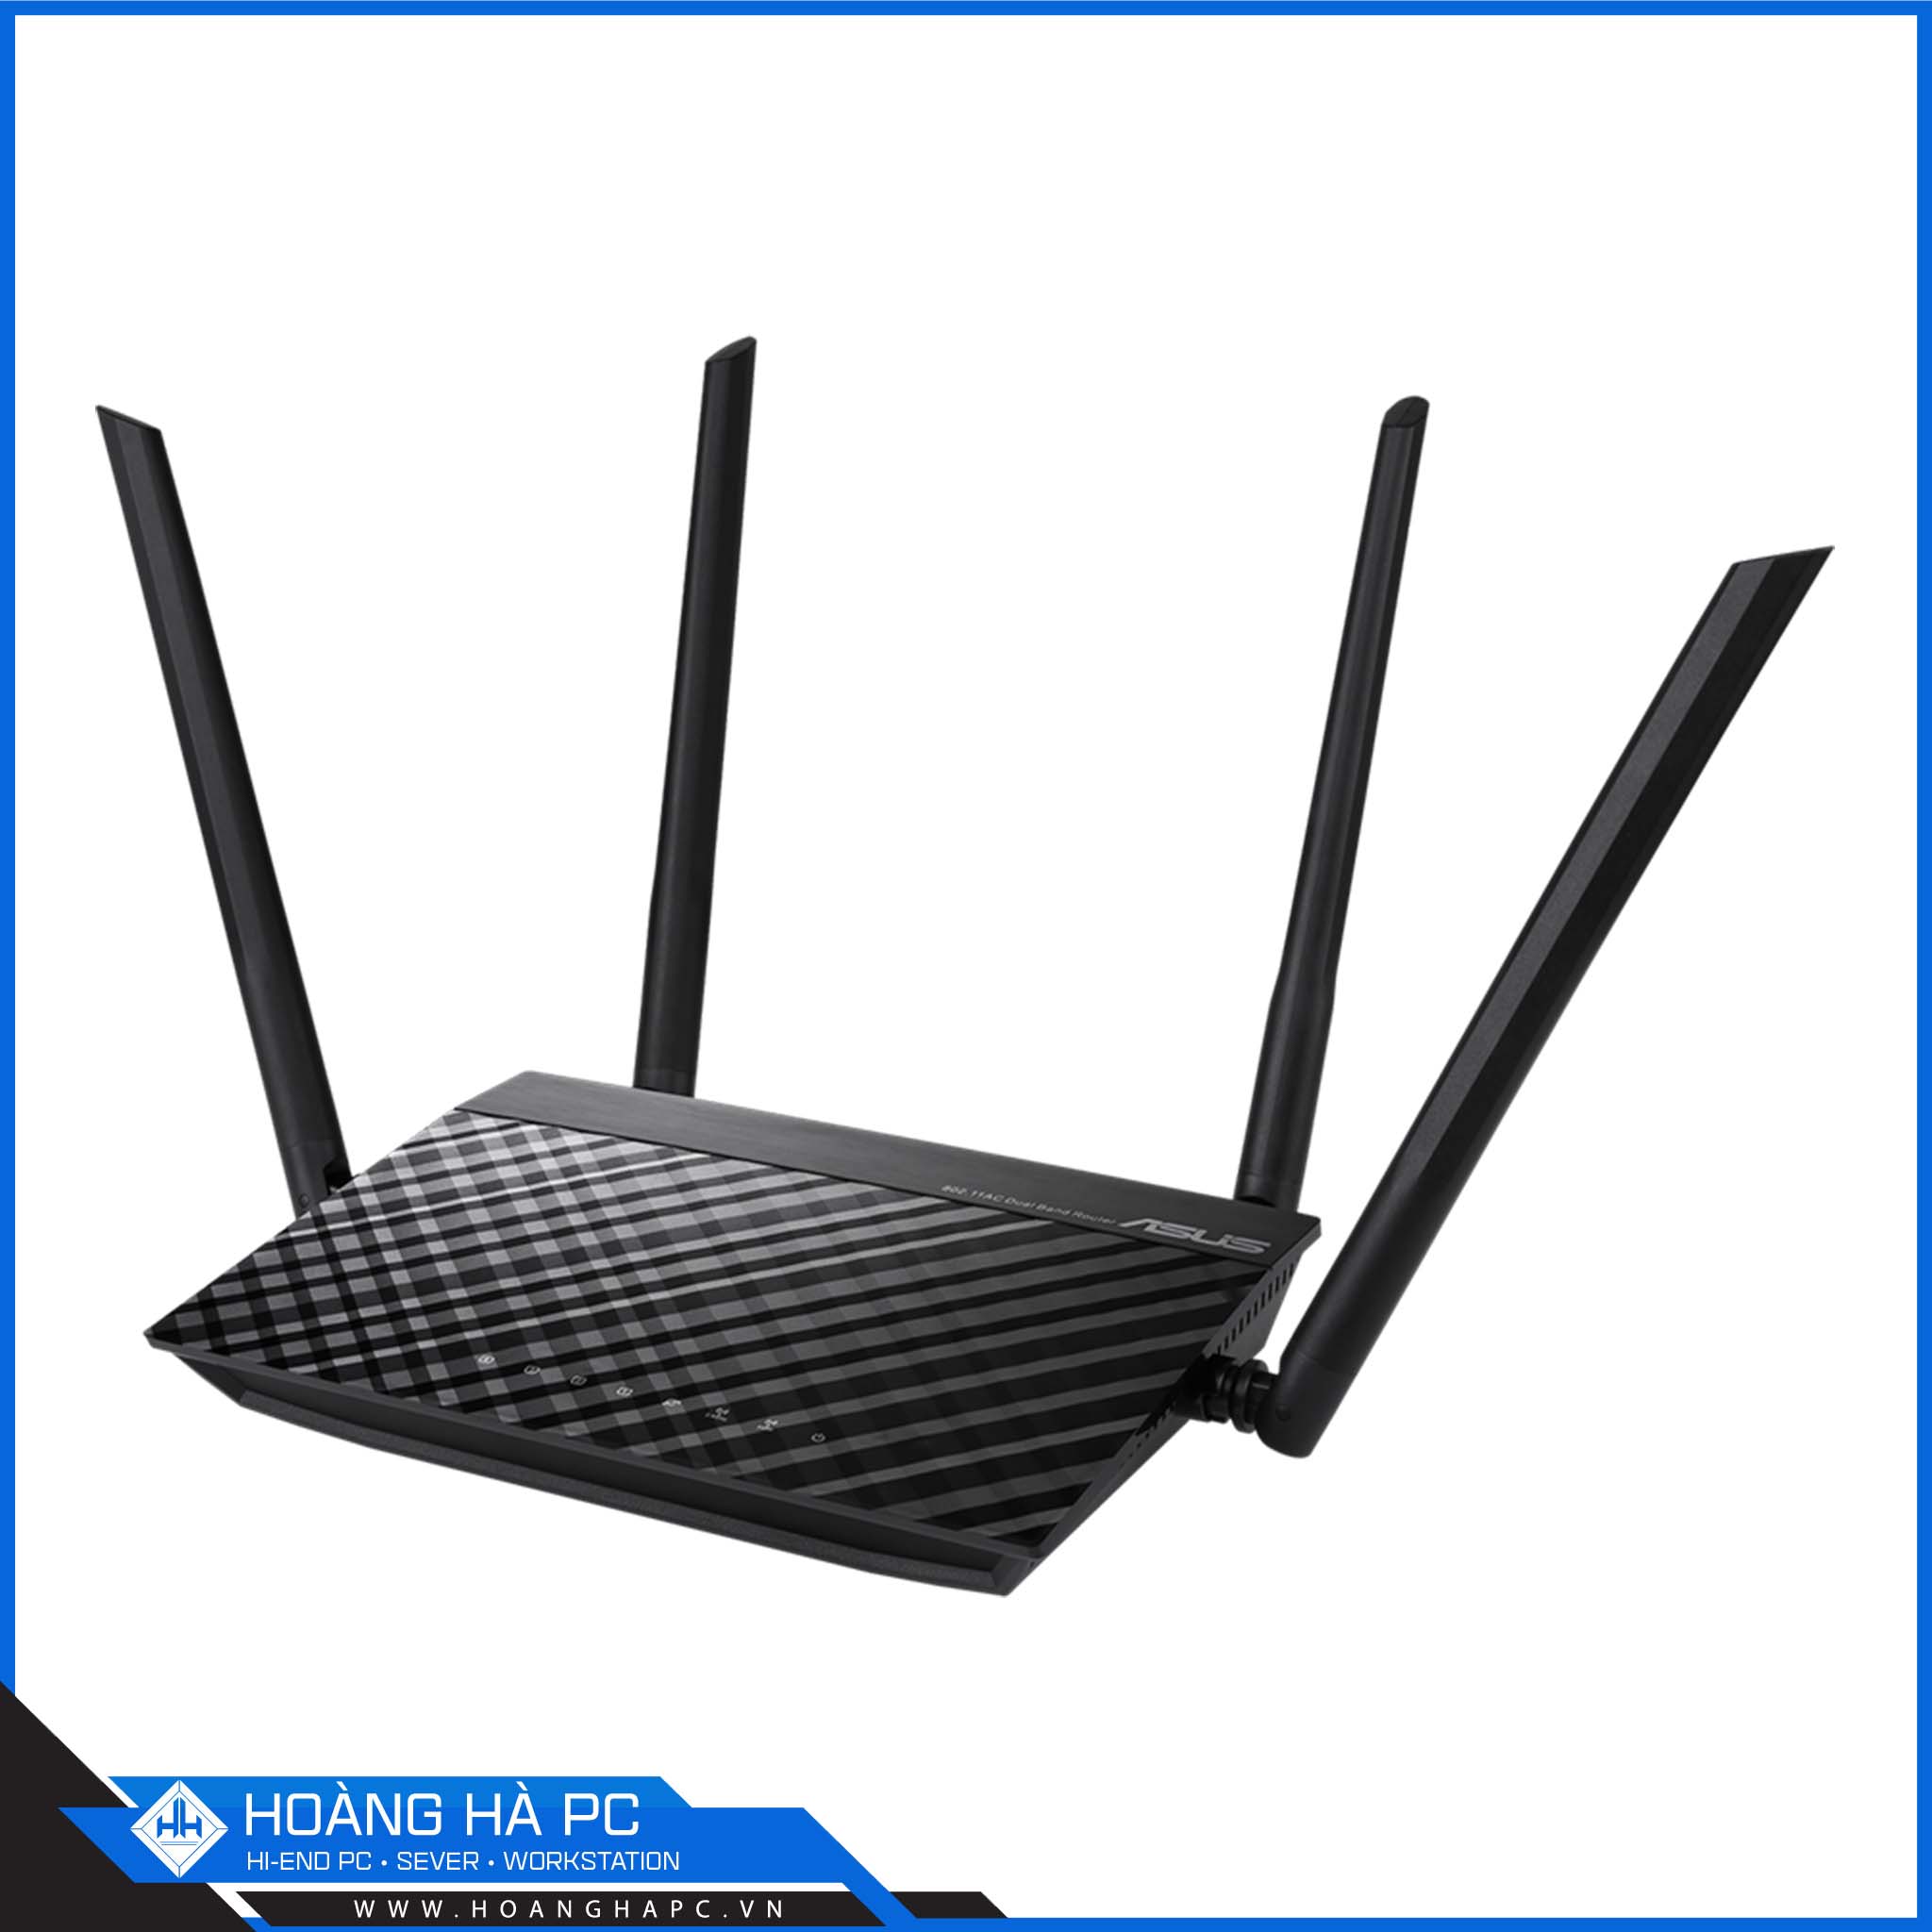 Router Wifi ASUS RT-AC750L (2 Băng Tần)